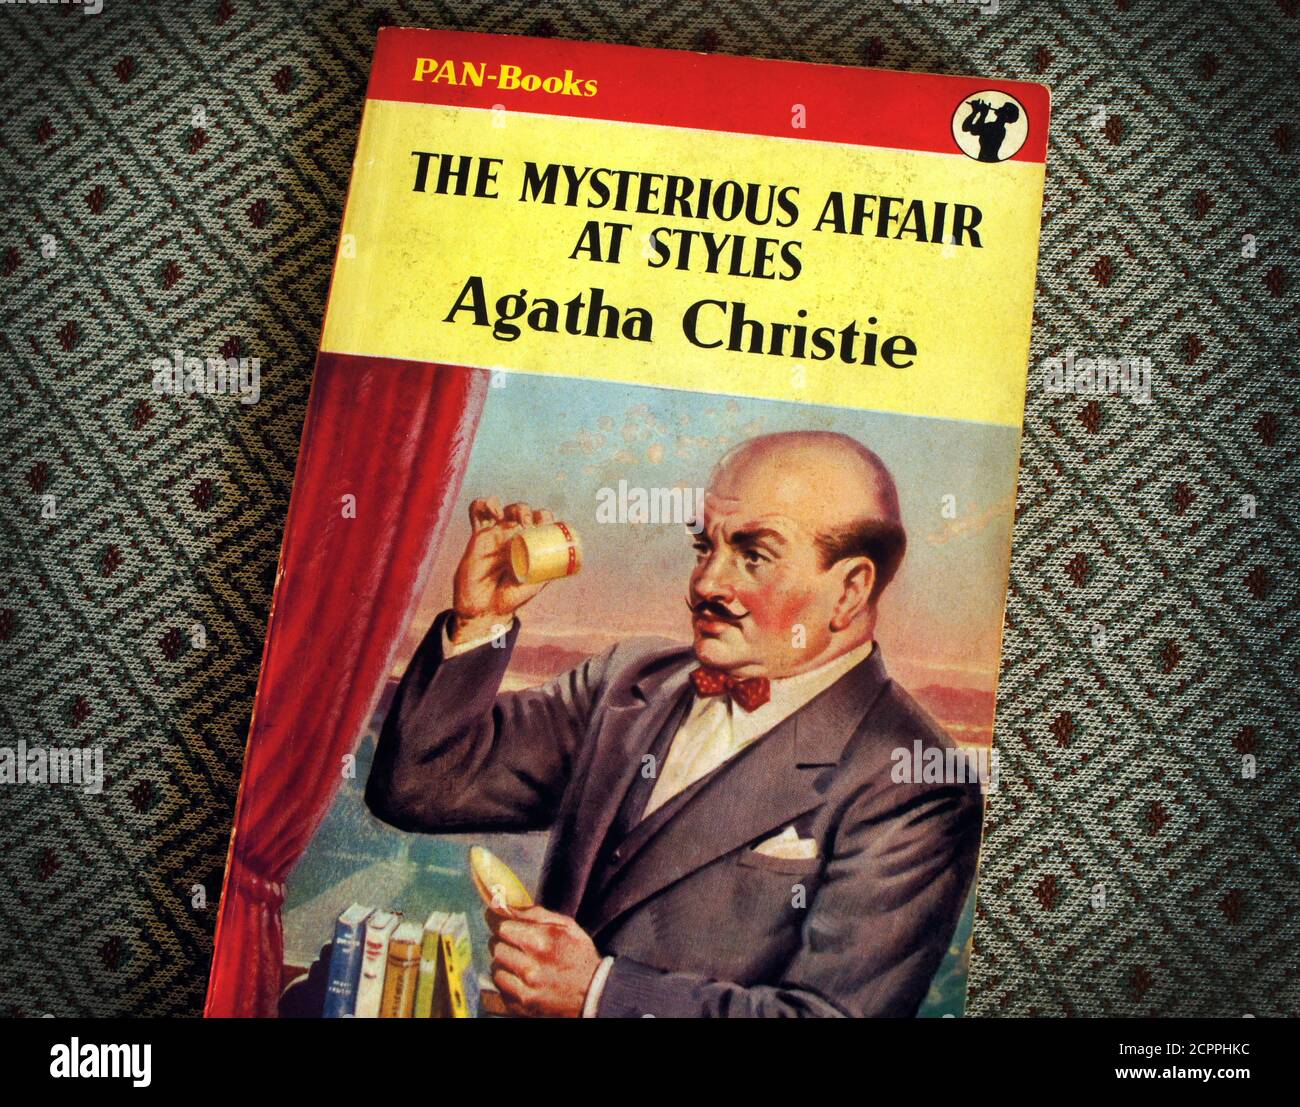 Second-hand vintage Agatha Christie paperback. The Mysterious Affair at Styles. Pan books 1950s cover featuring Poirot 100th Anniversary in 2020.. Stock Photo